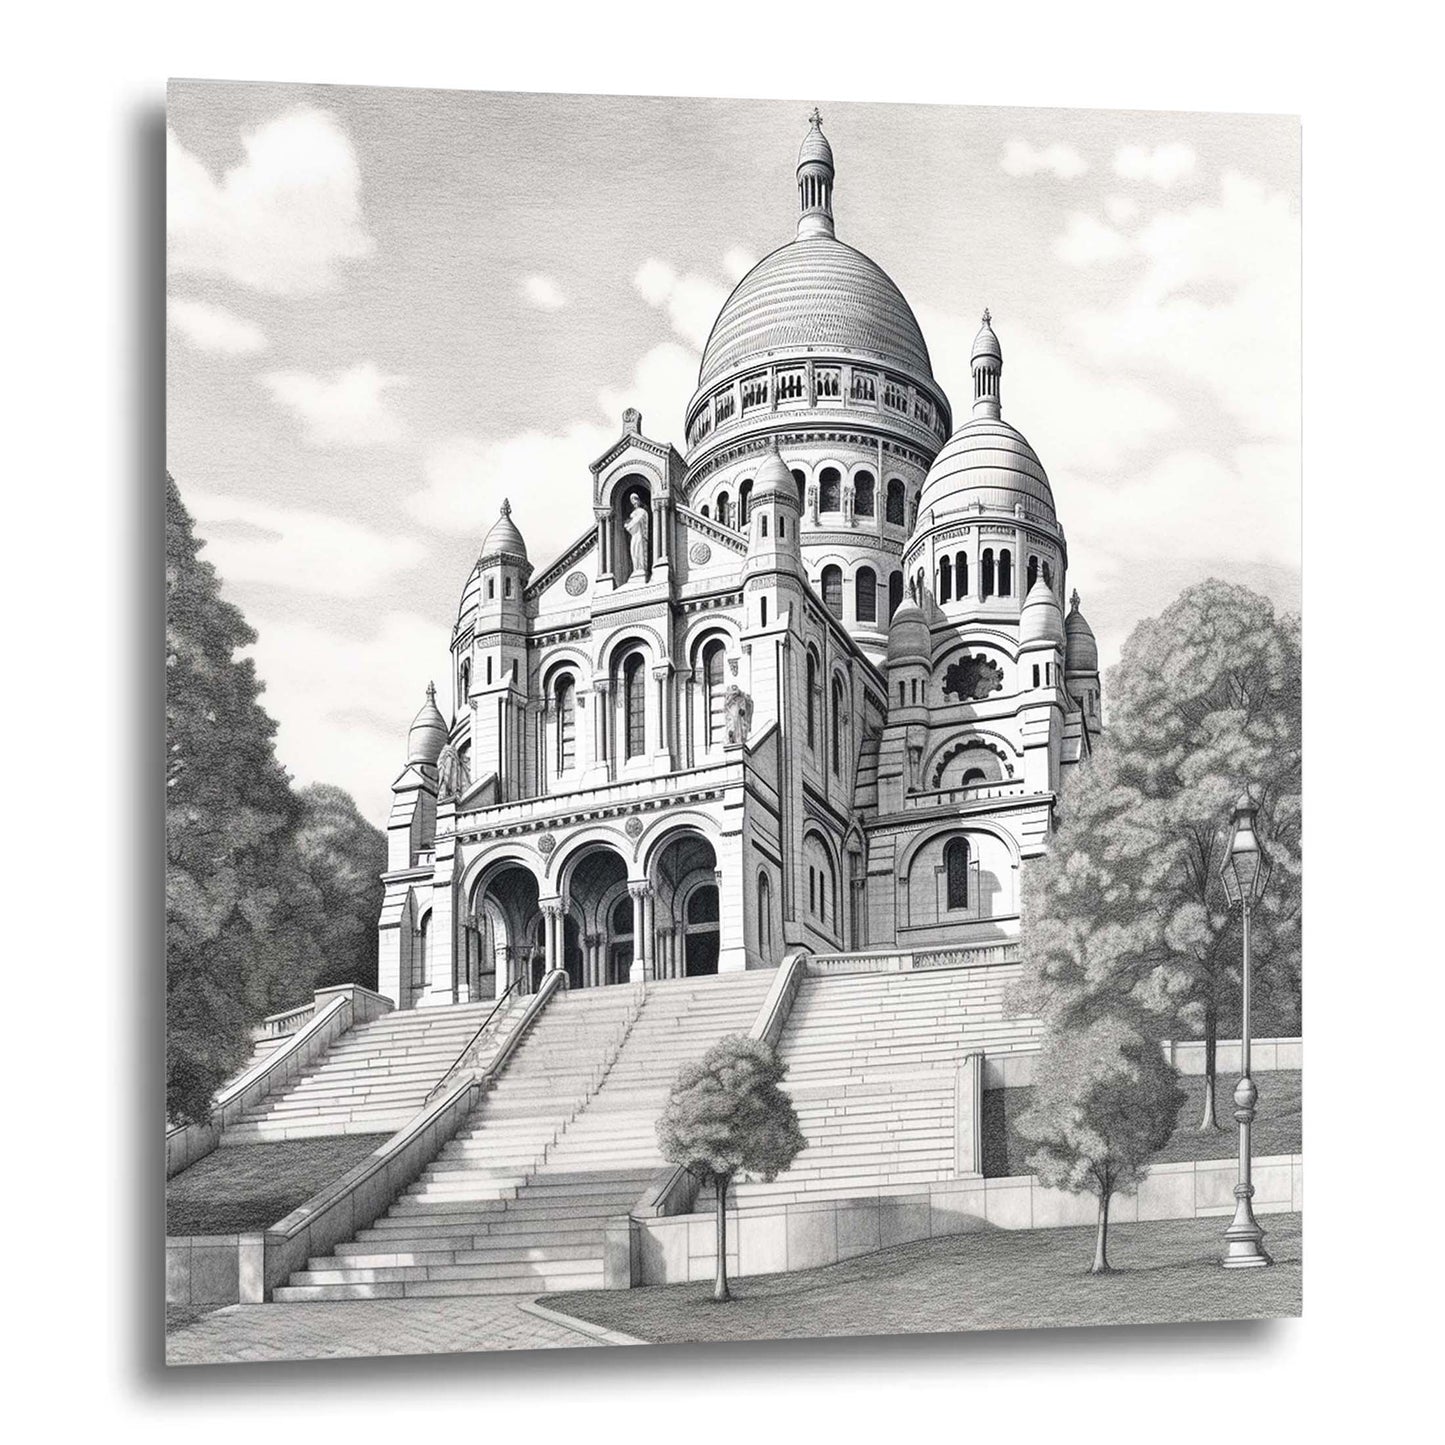 Paris Sacre Coeur - mural in the style of a drawing